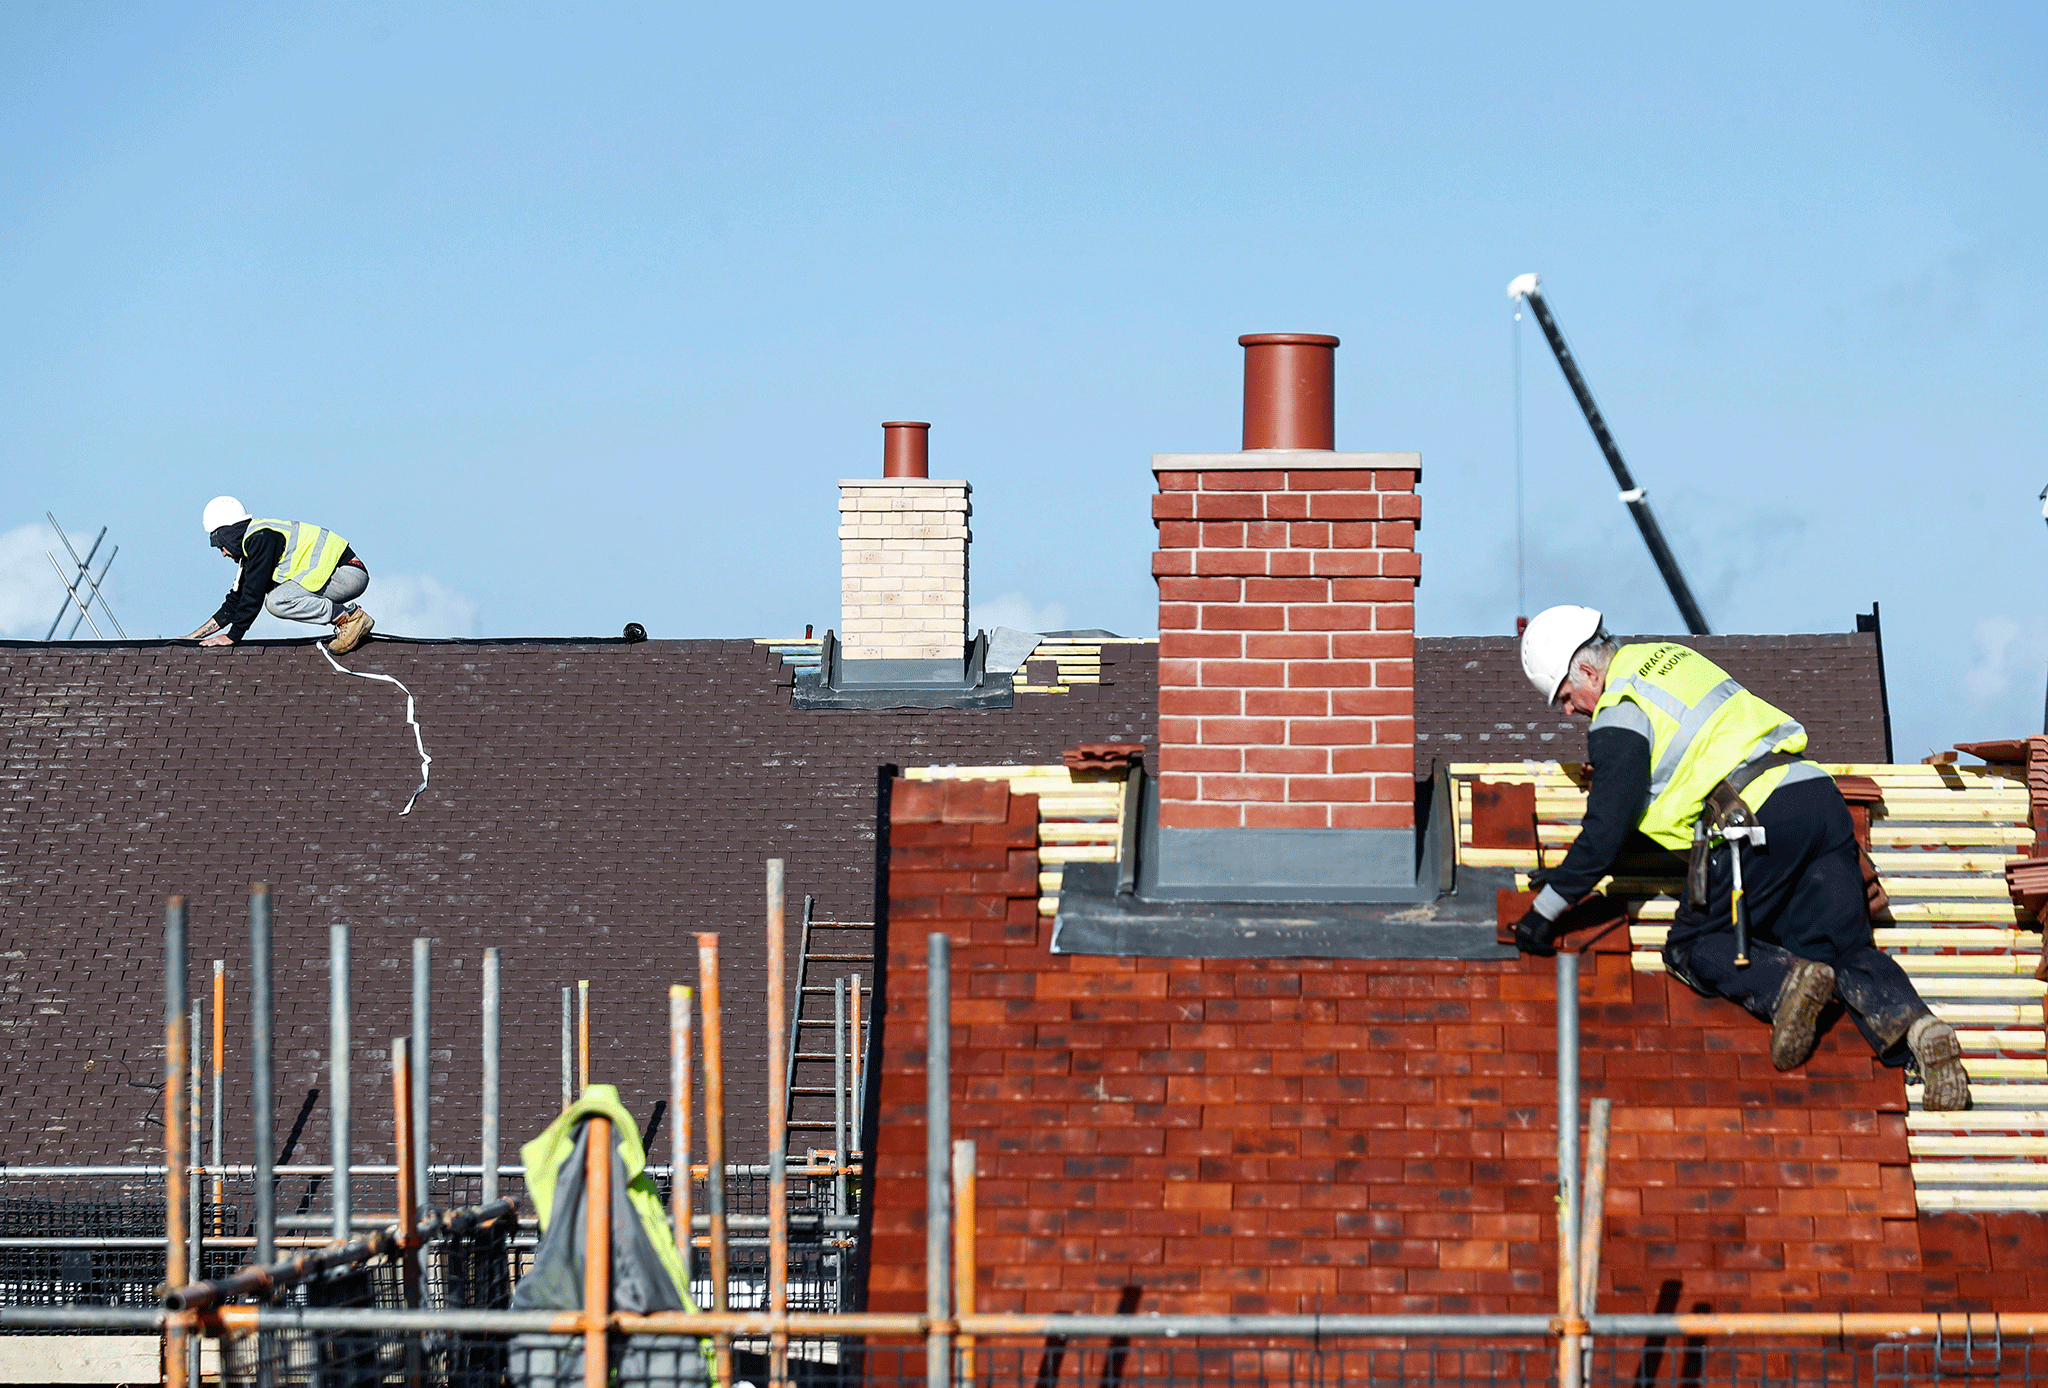 Construction consultancy Arcadis estimates that Britain needs to recruit over 400,000 people annually to meet housing demand